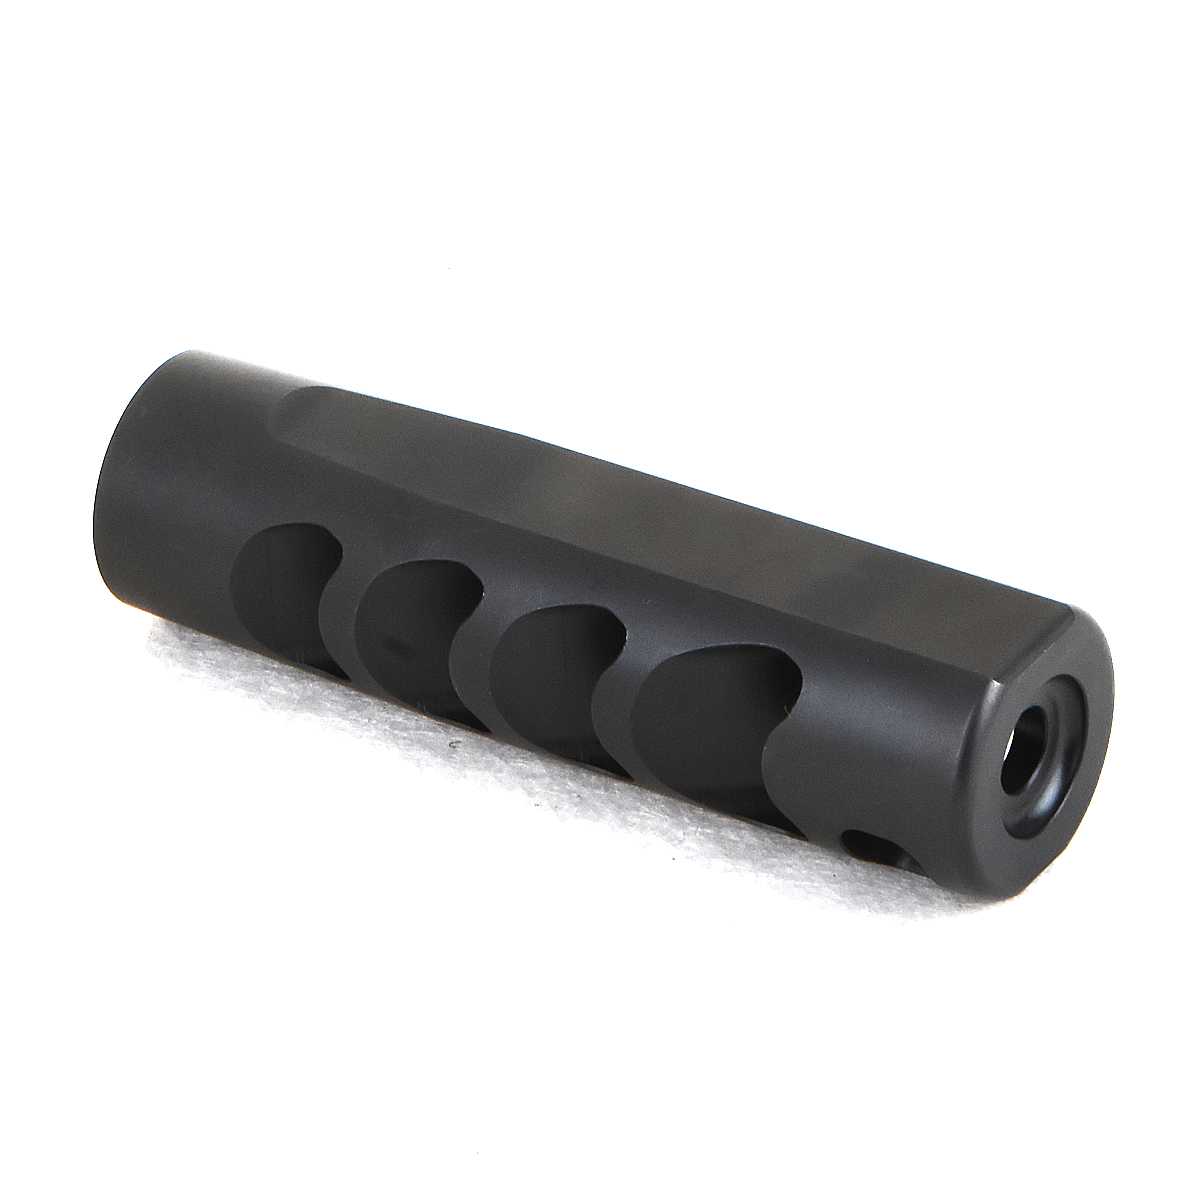 Stainless .223 5.56 Muzzle Brake 1/2x28 Thread Muzzle Device with ...